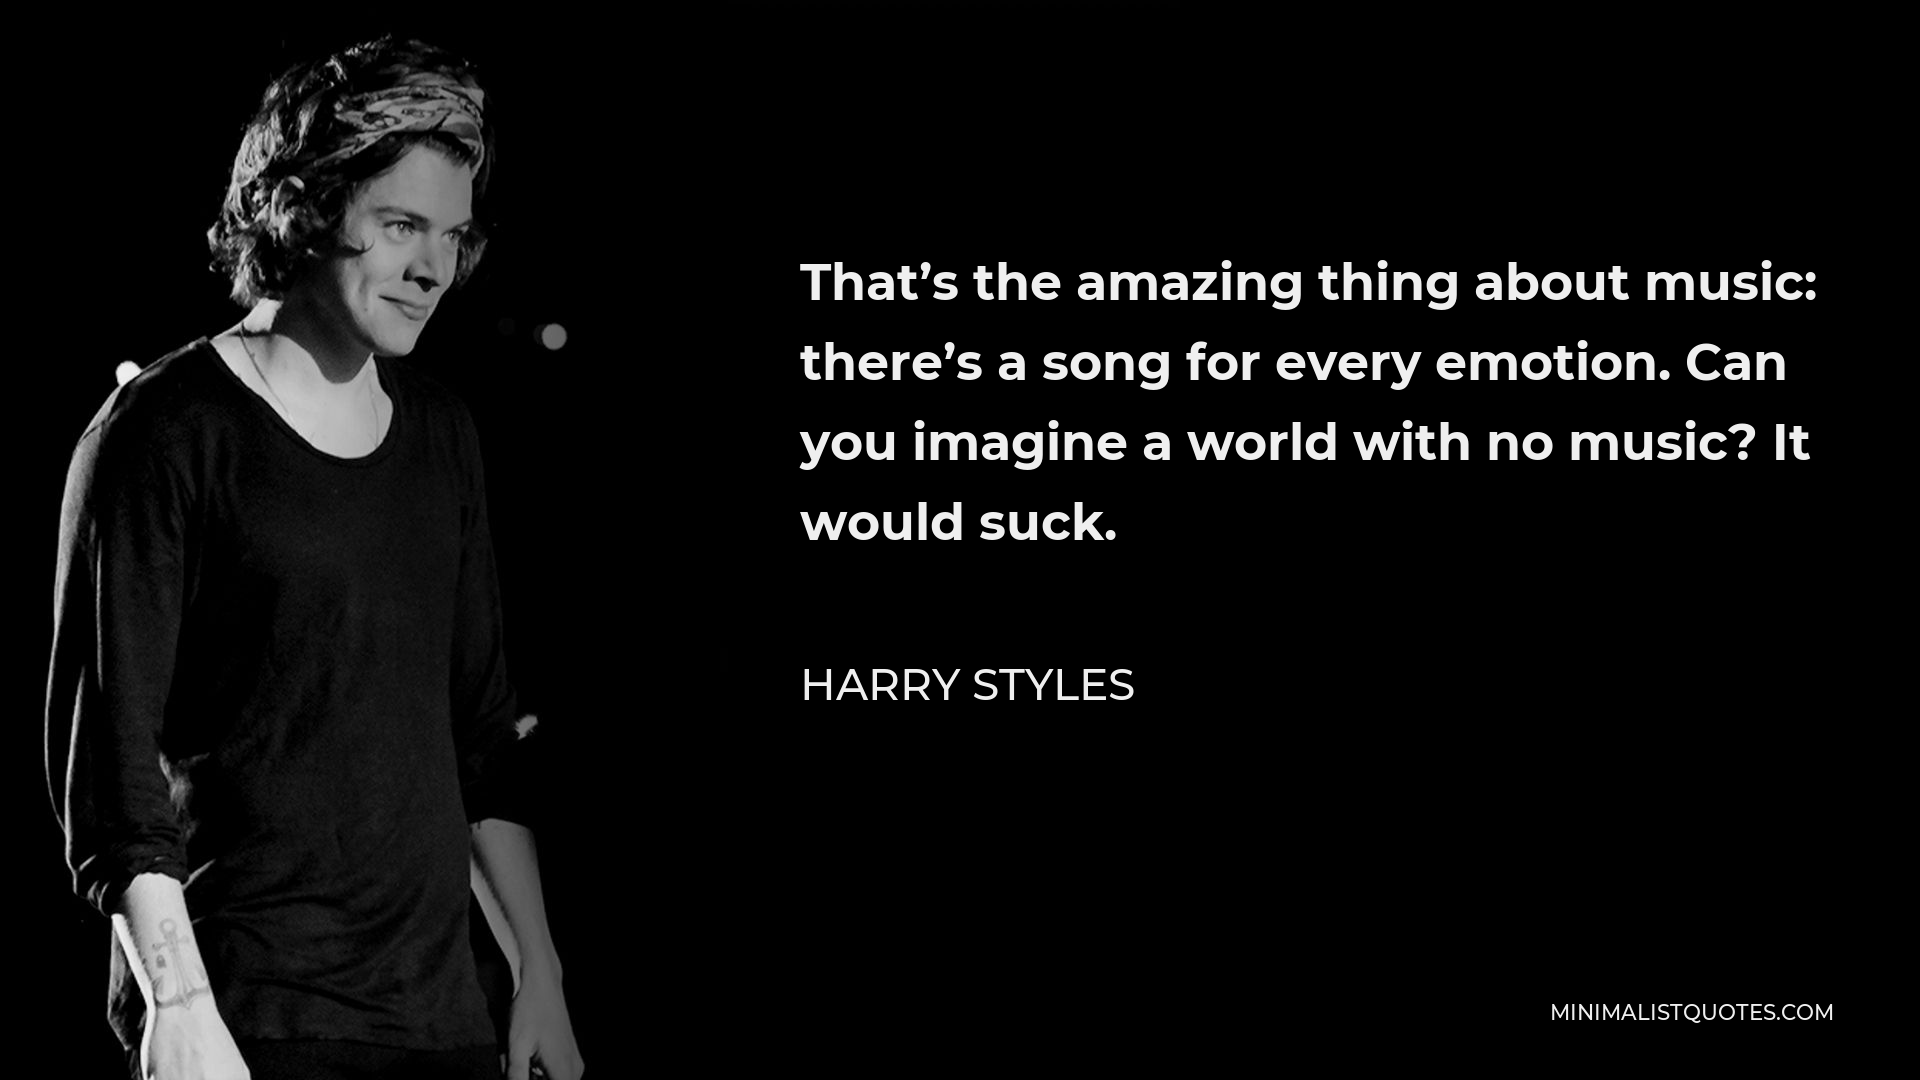 Harry Styles Quote - That’s the amazing thing about music: there’s a song for every emotion. Can you imagine a world with no music? It would suck.